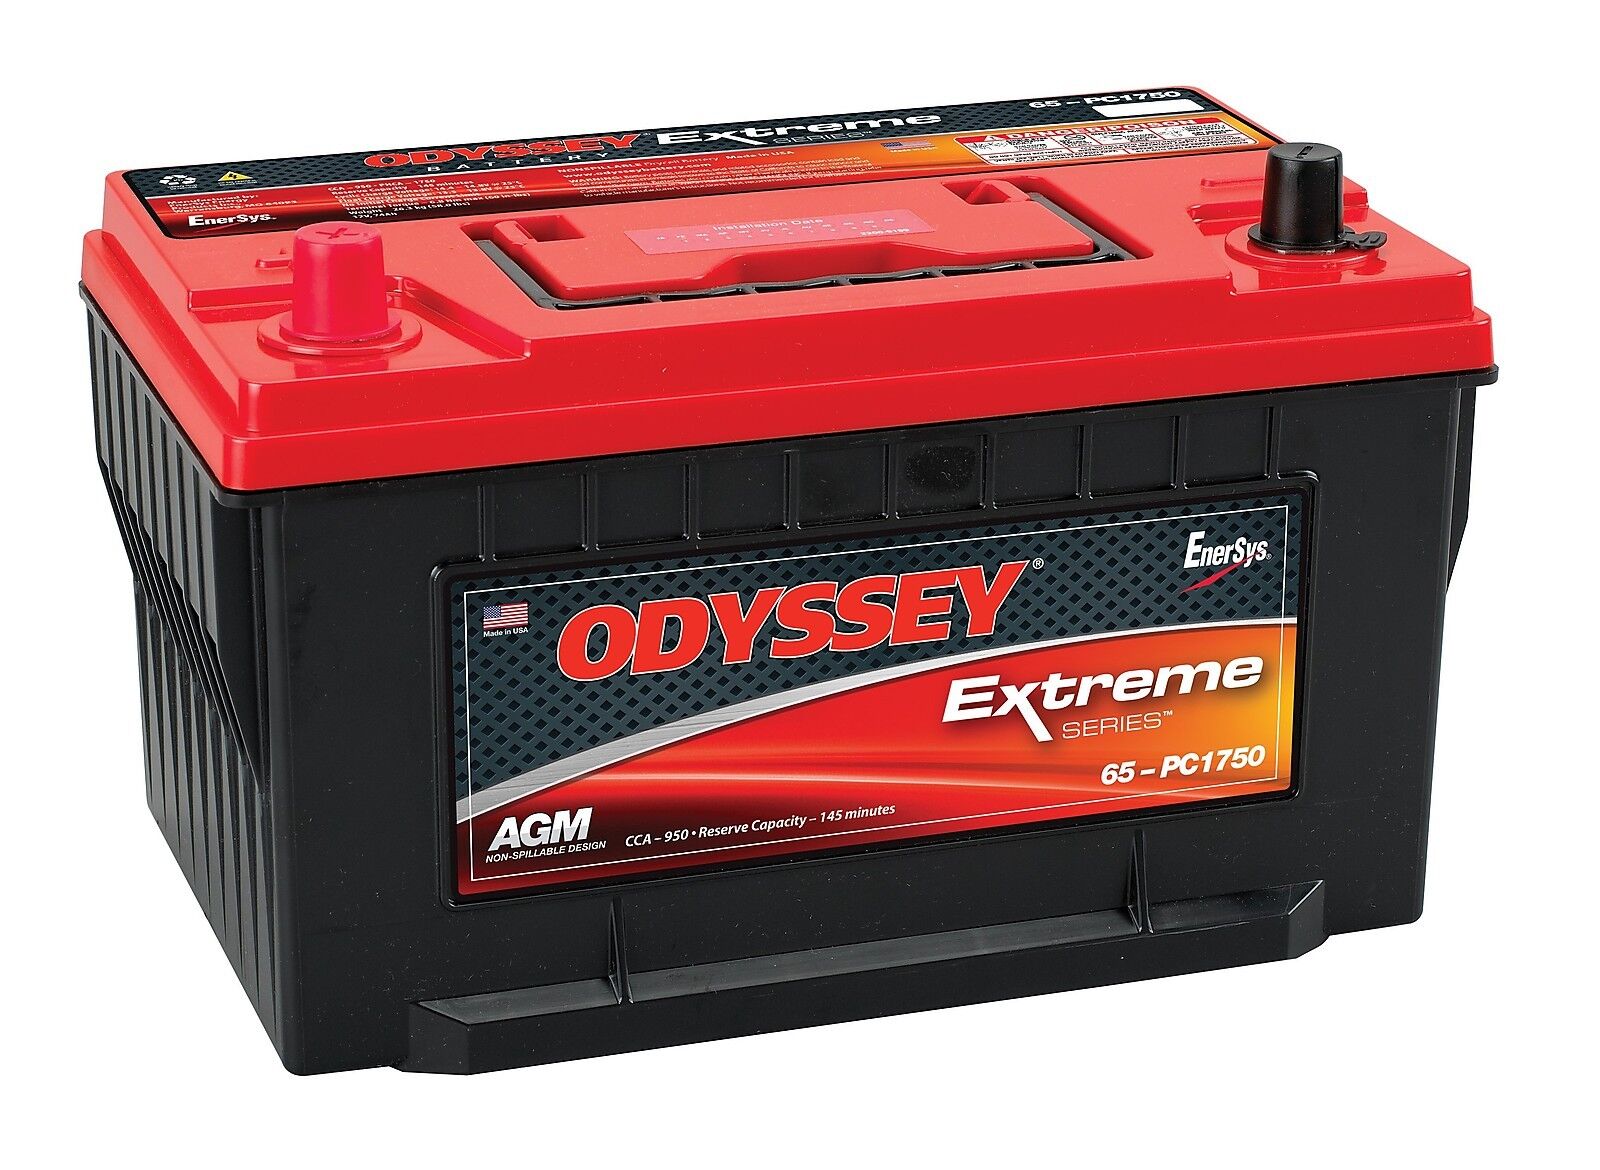 Odyssey 65-PC-1750 Battery - Made in the USA [65-PC1750]